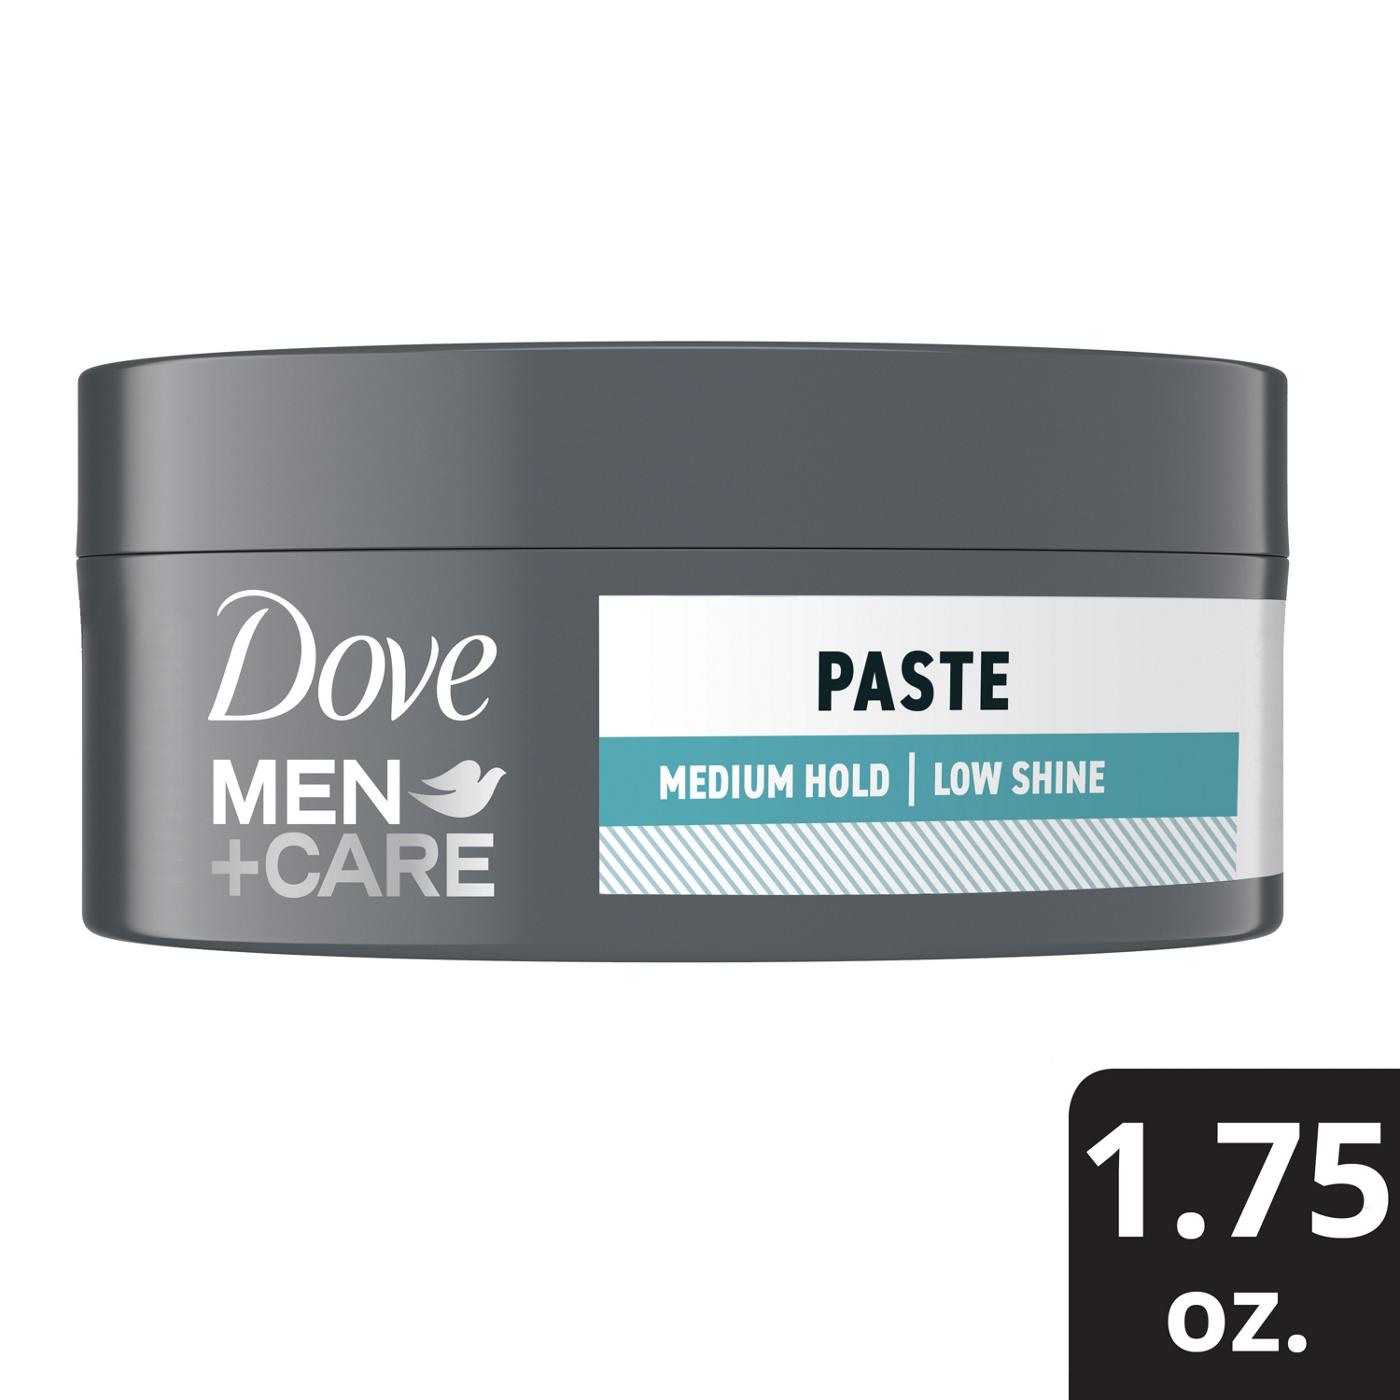 Dove Men+Care Styling Aid Sculpting Hair Paste; image 6 of 6